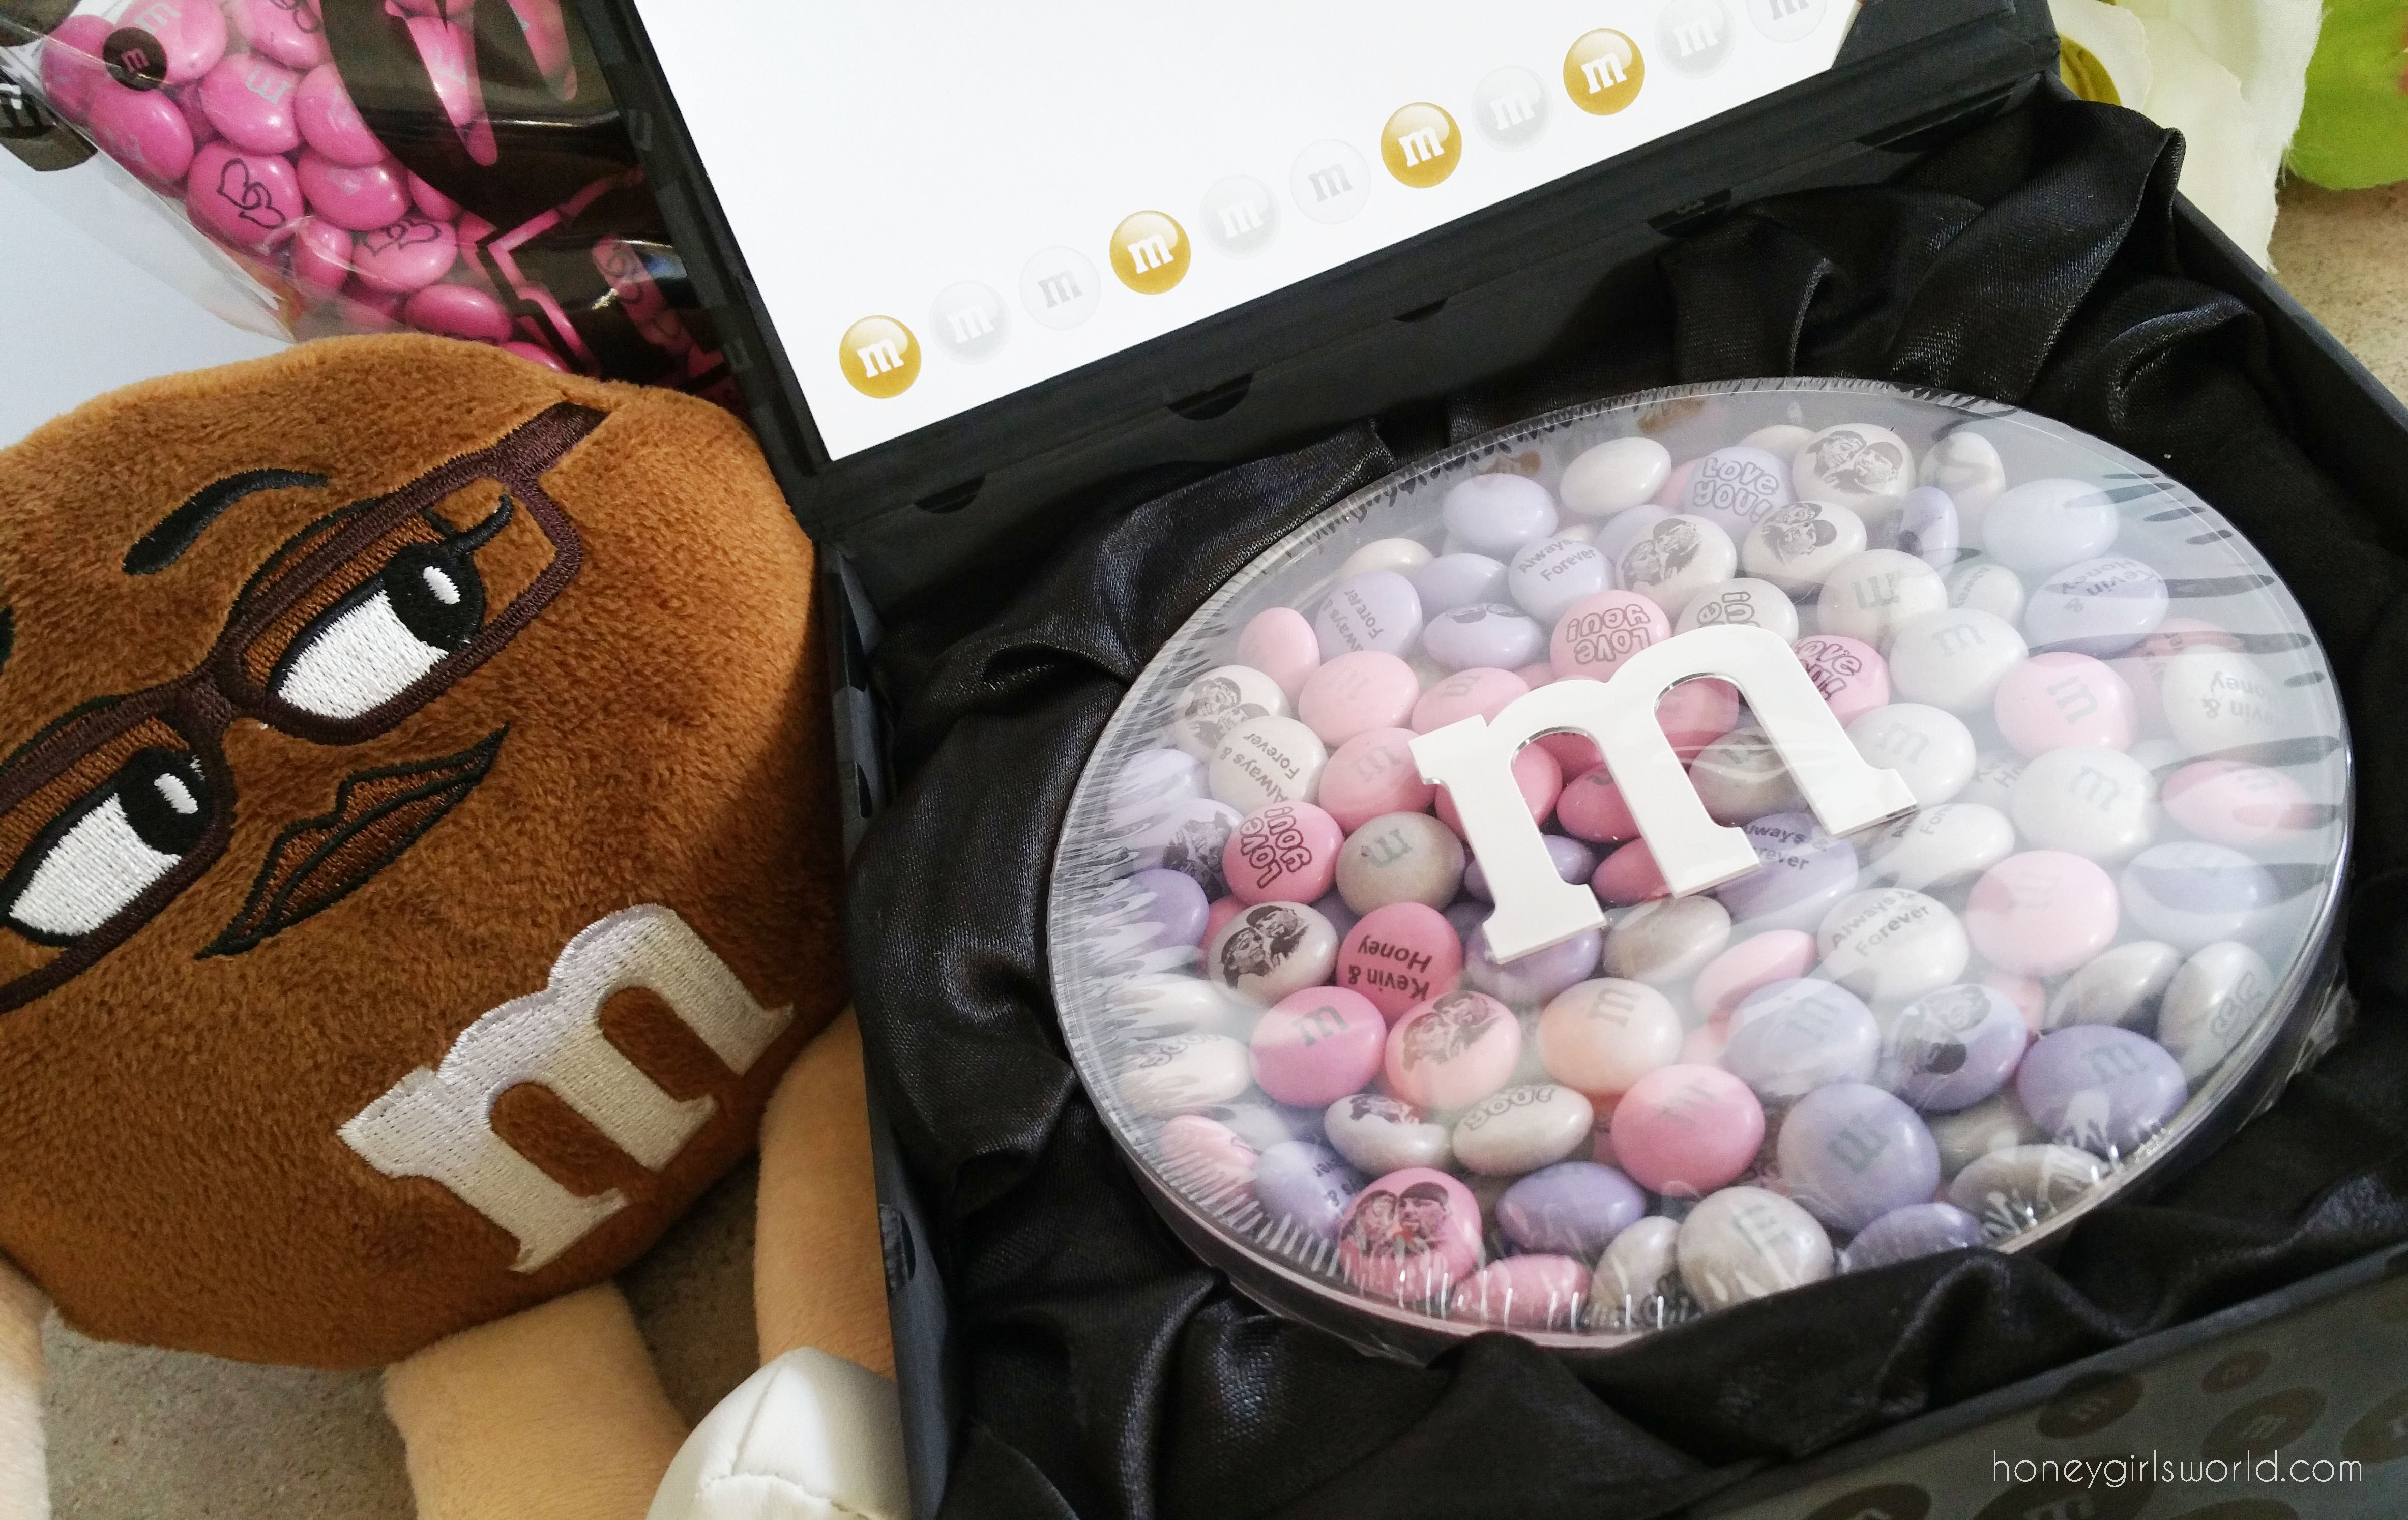 my m&m's, candy, treat, gift, personalized gift, chocolate, M&M's, 